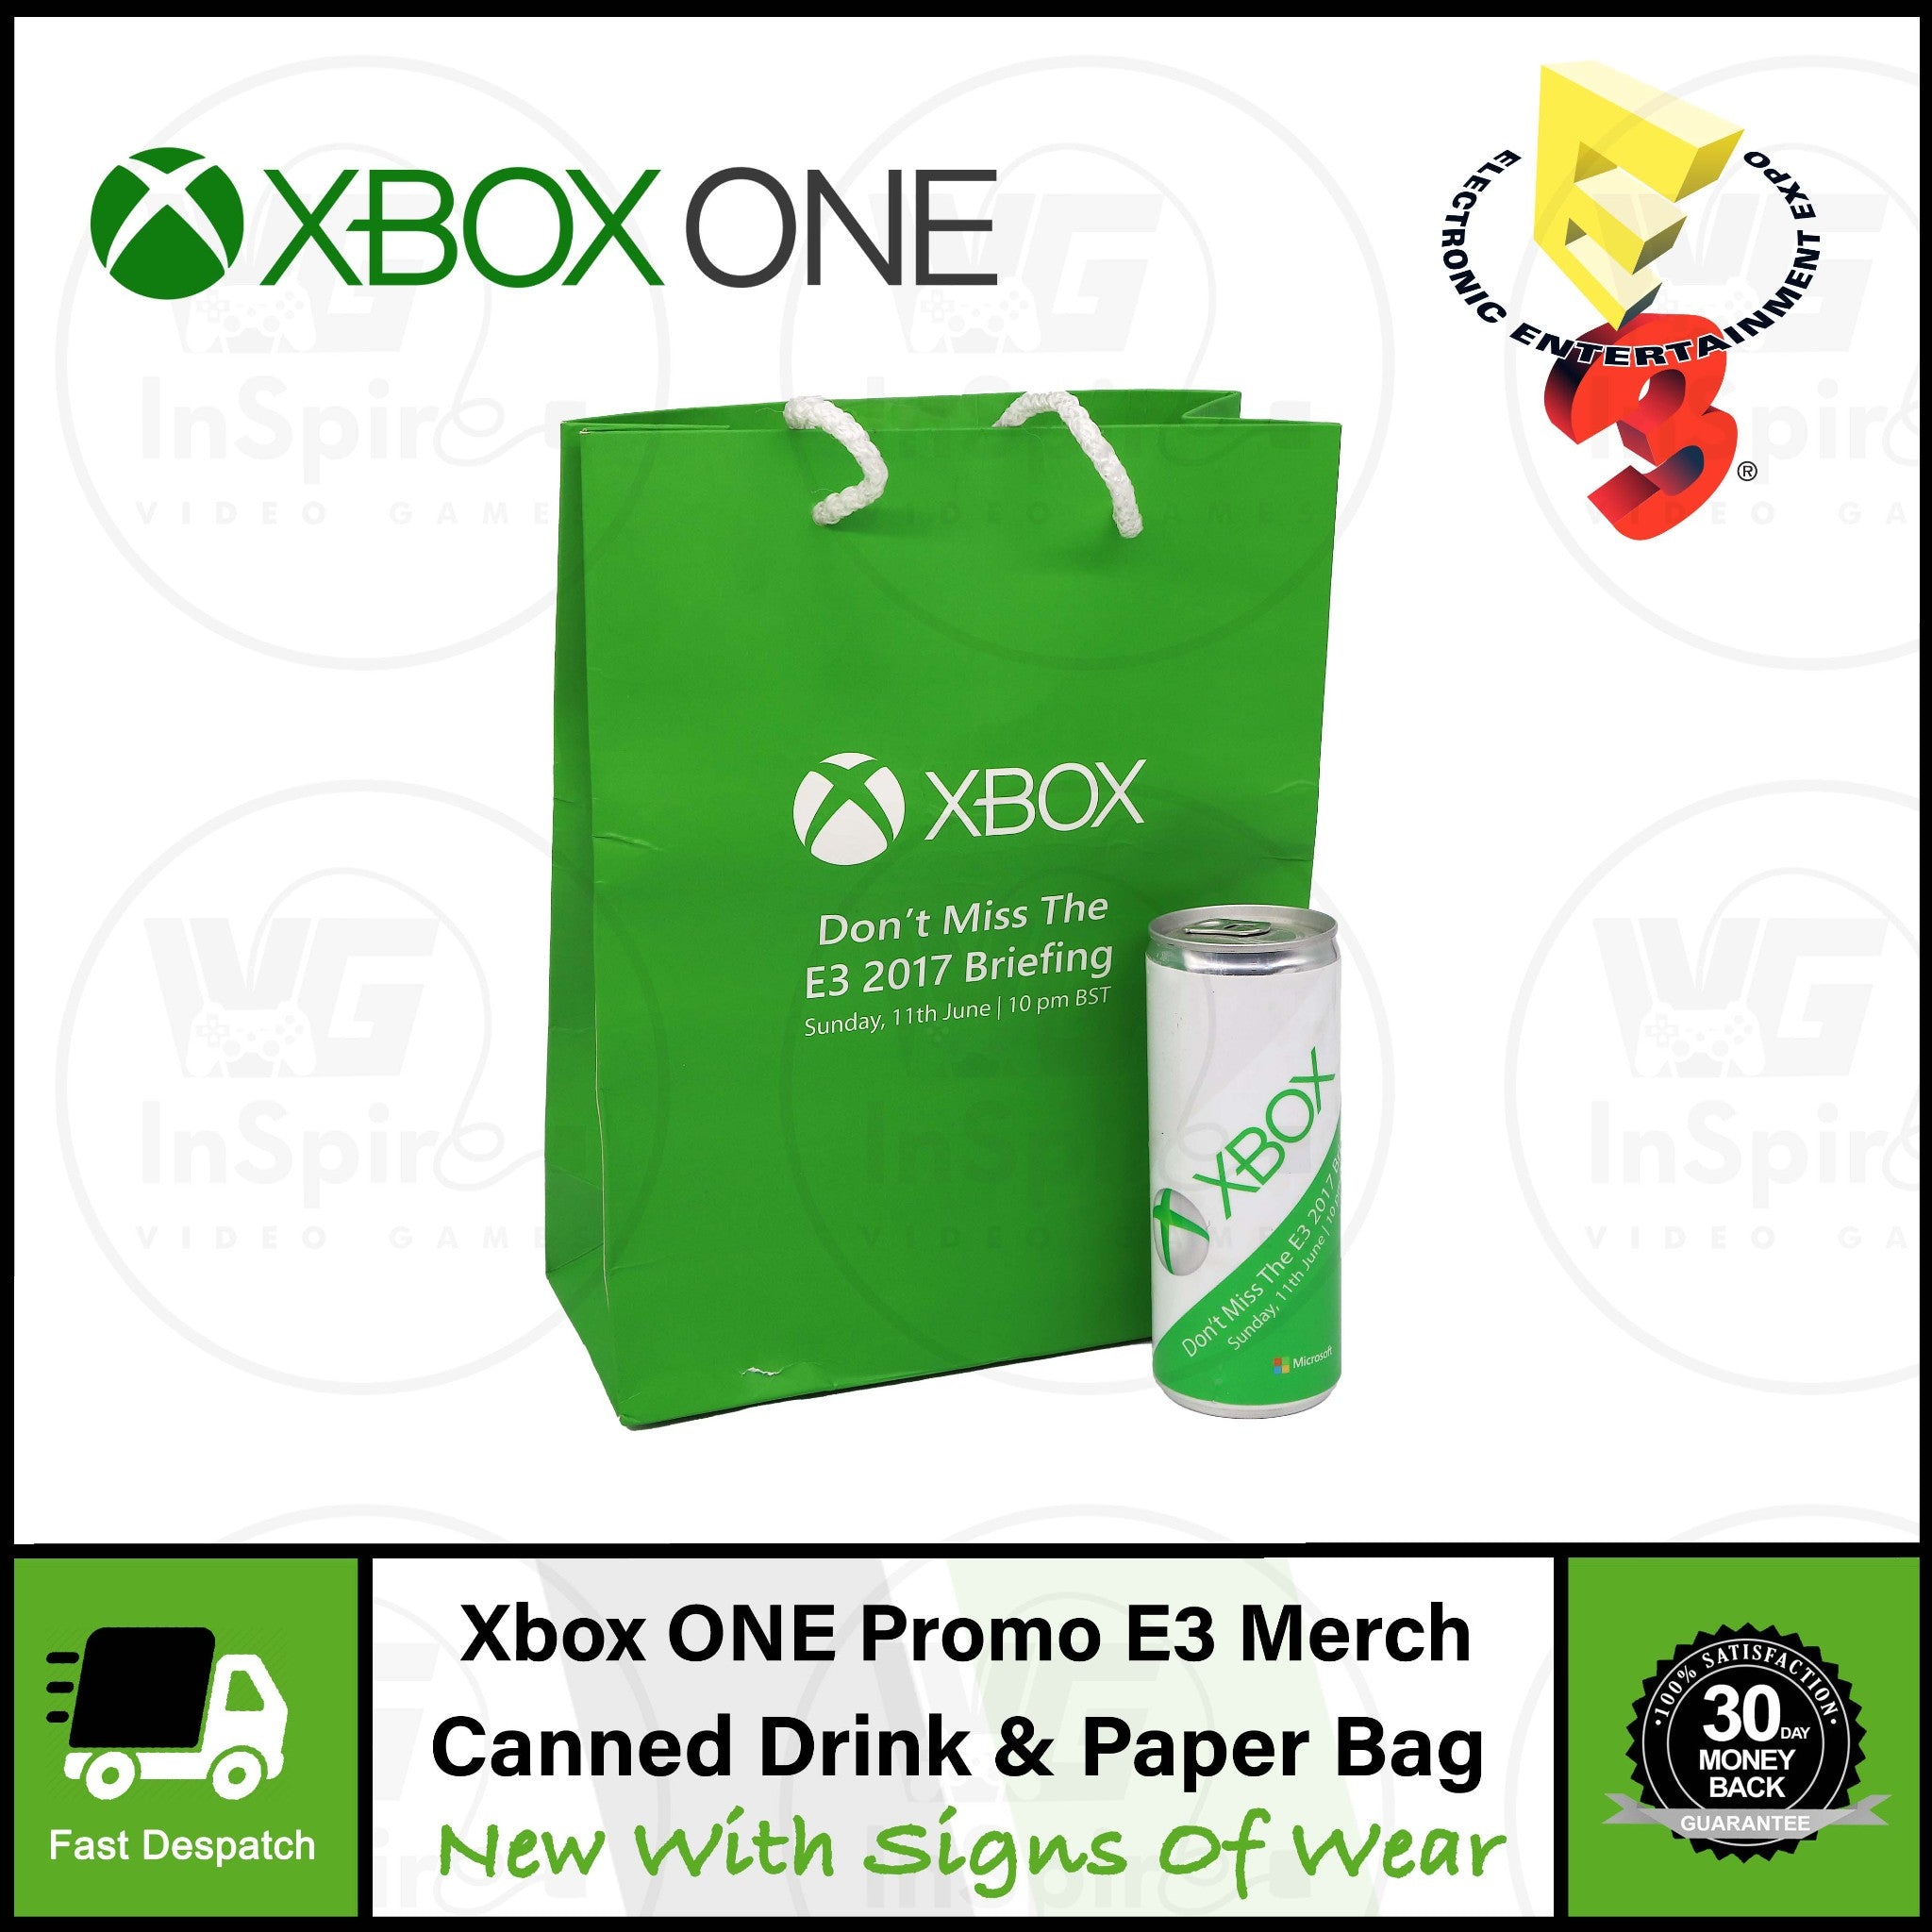 Microsoft Xbox One E3 Expo 2017 Canned Drink & Bag | Promo Merchandise